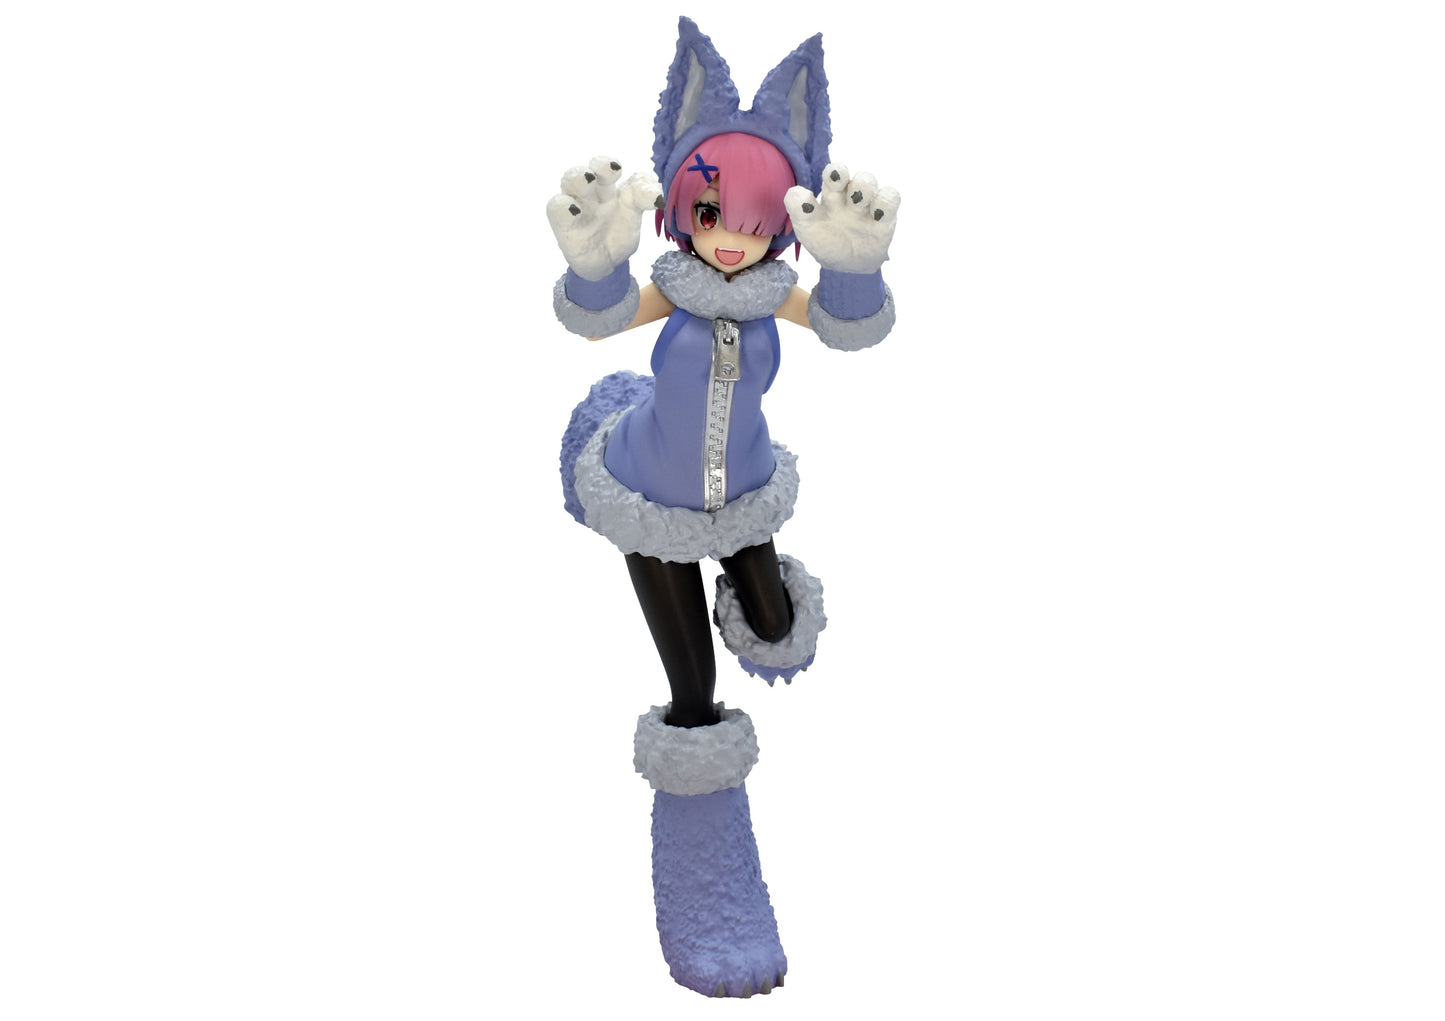 "Re: ZERO" Ram (The Wolf and the Seven Kids Pastel Color Ver.)